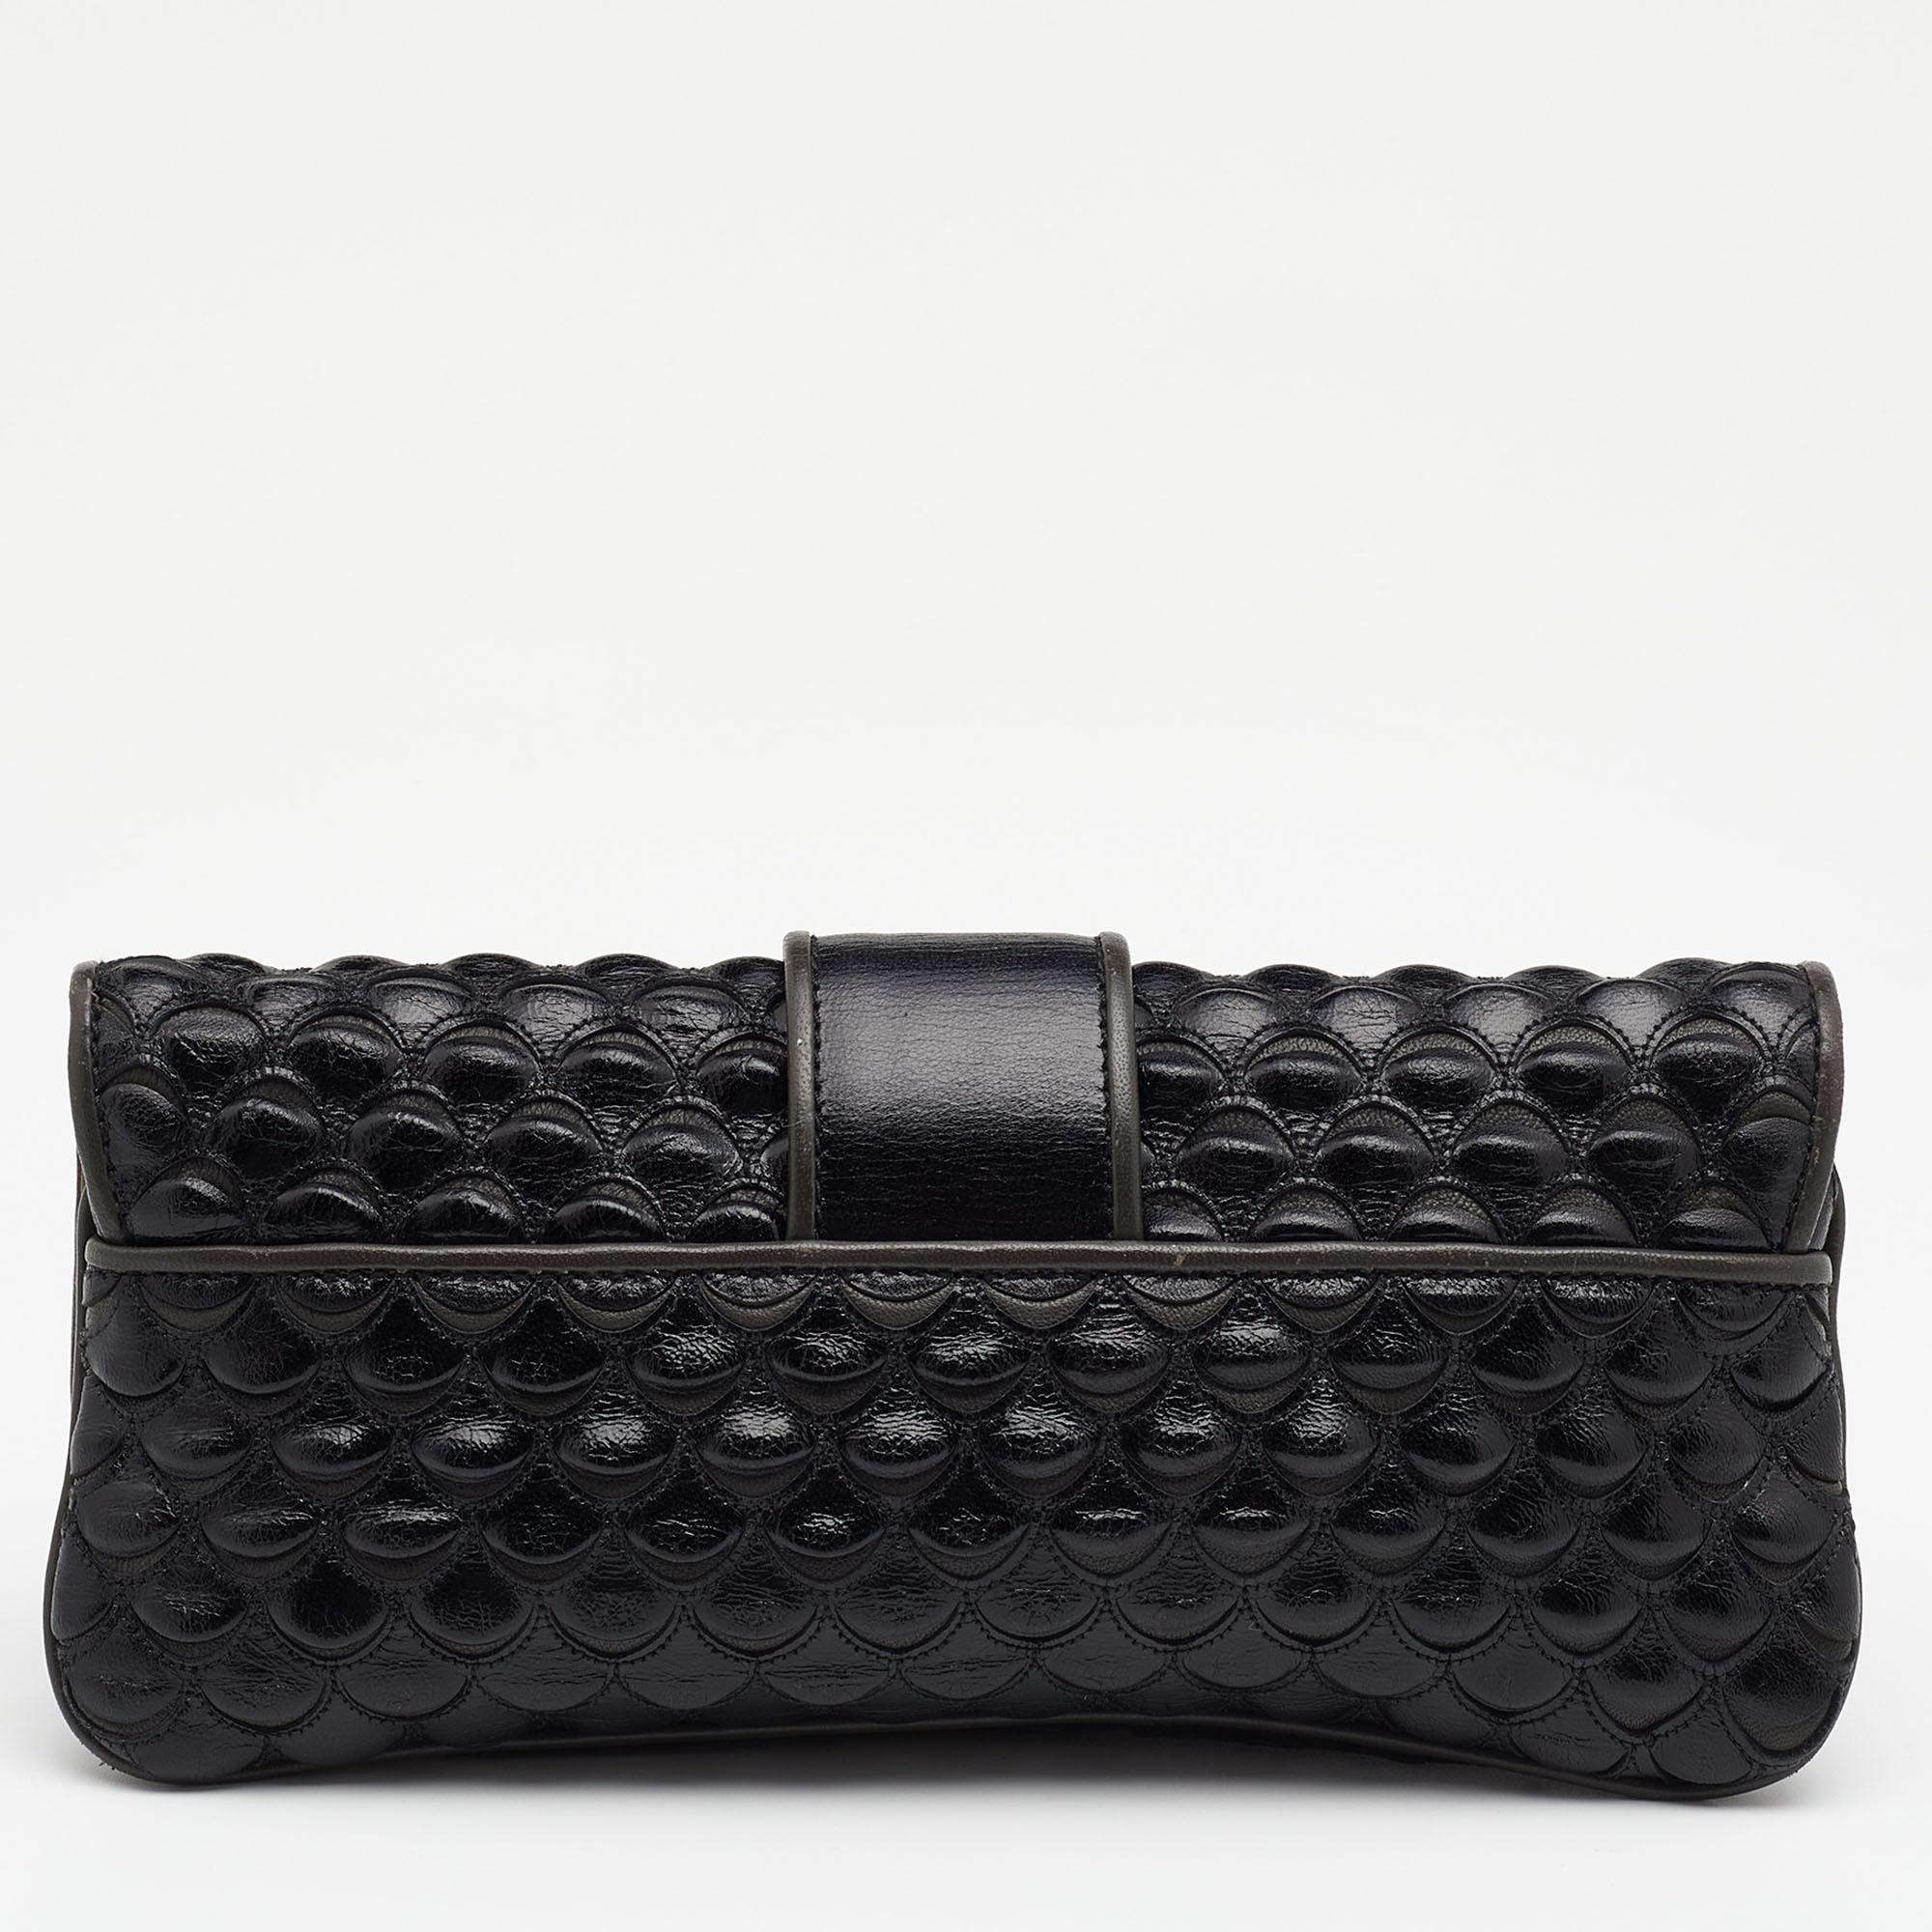 This unique clutch by Dior is crafted from fish scale leather in a black and grey hue. It features a textured exterior and a front flap. It opens to a satin-lined interior well-sized to hold your daily essentials.

Includes: Mirror